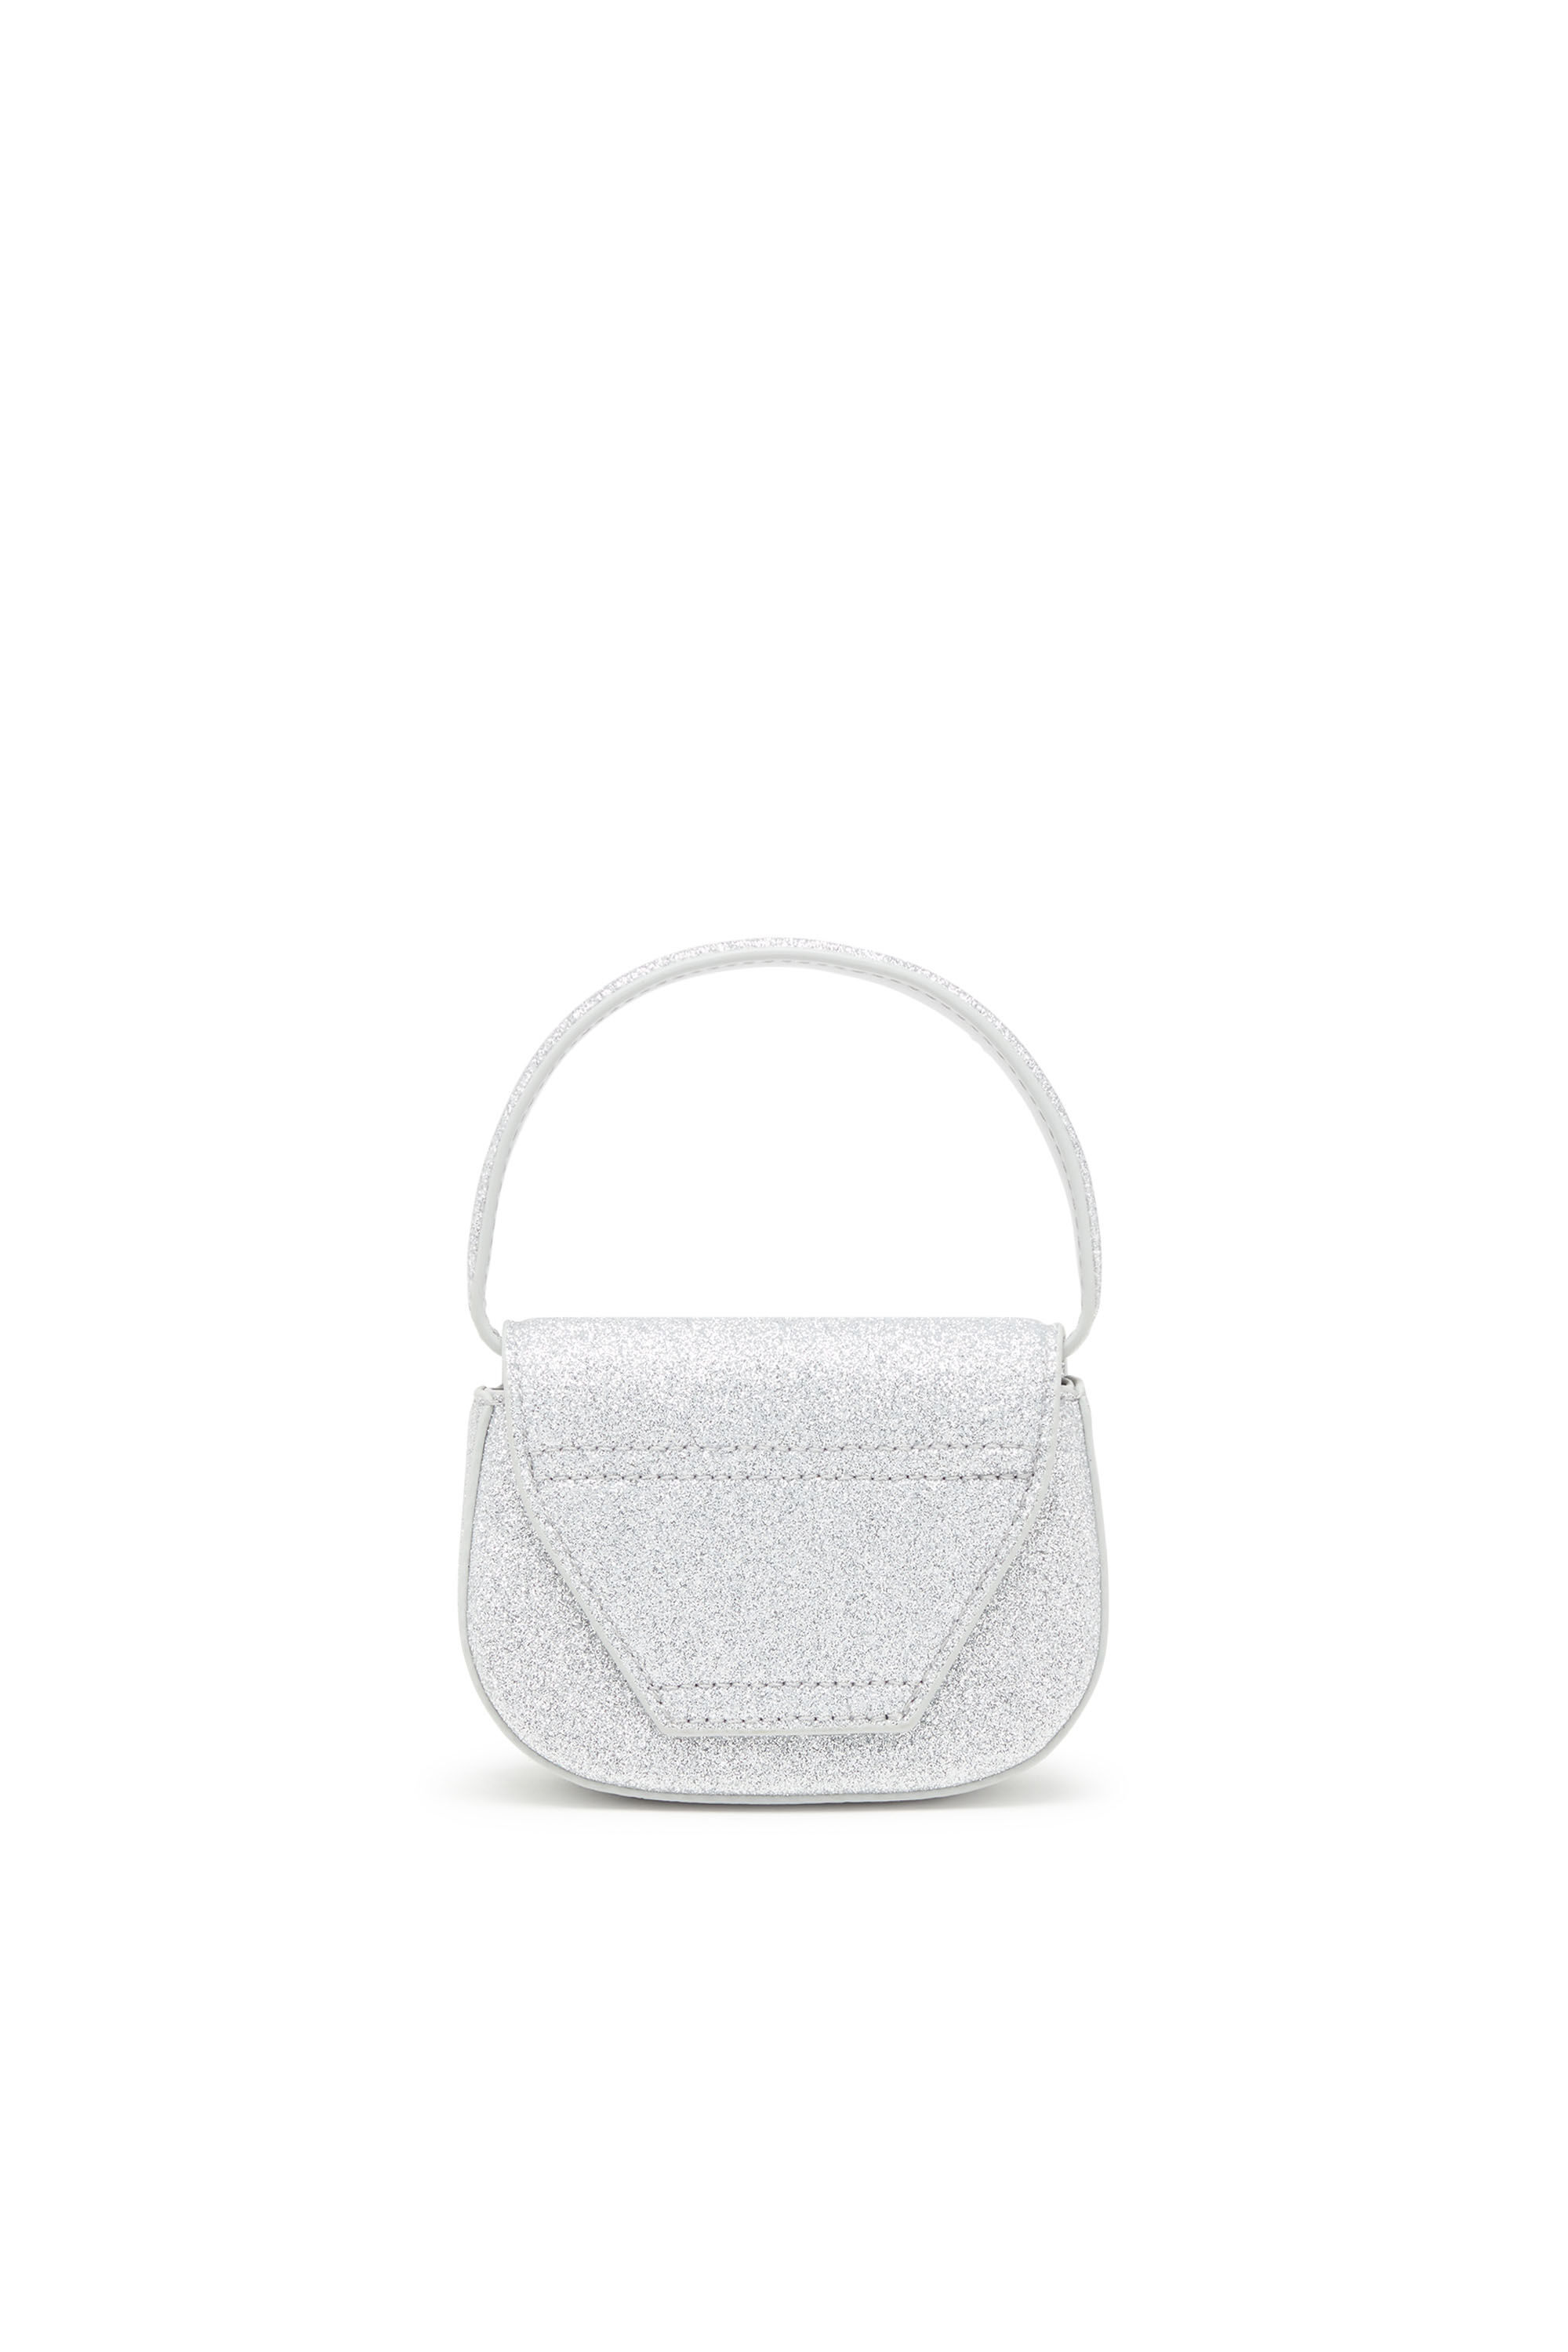 Diesel - 1DR XS, Woman 1DR XS-Iconic mini bag in glitter fabric in Silver - Image 3